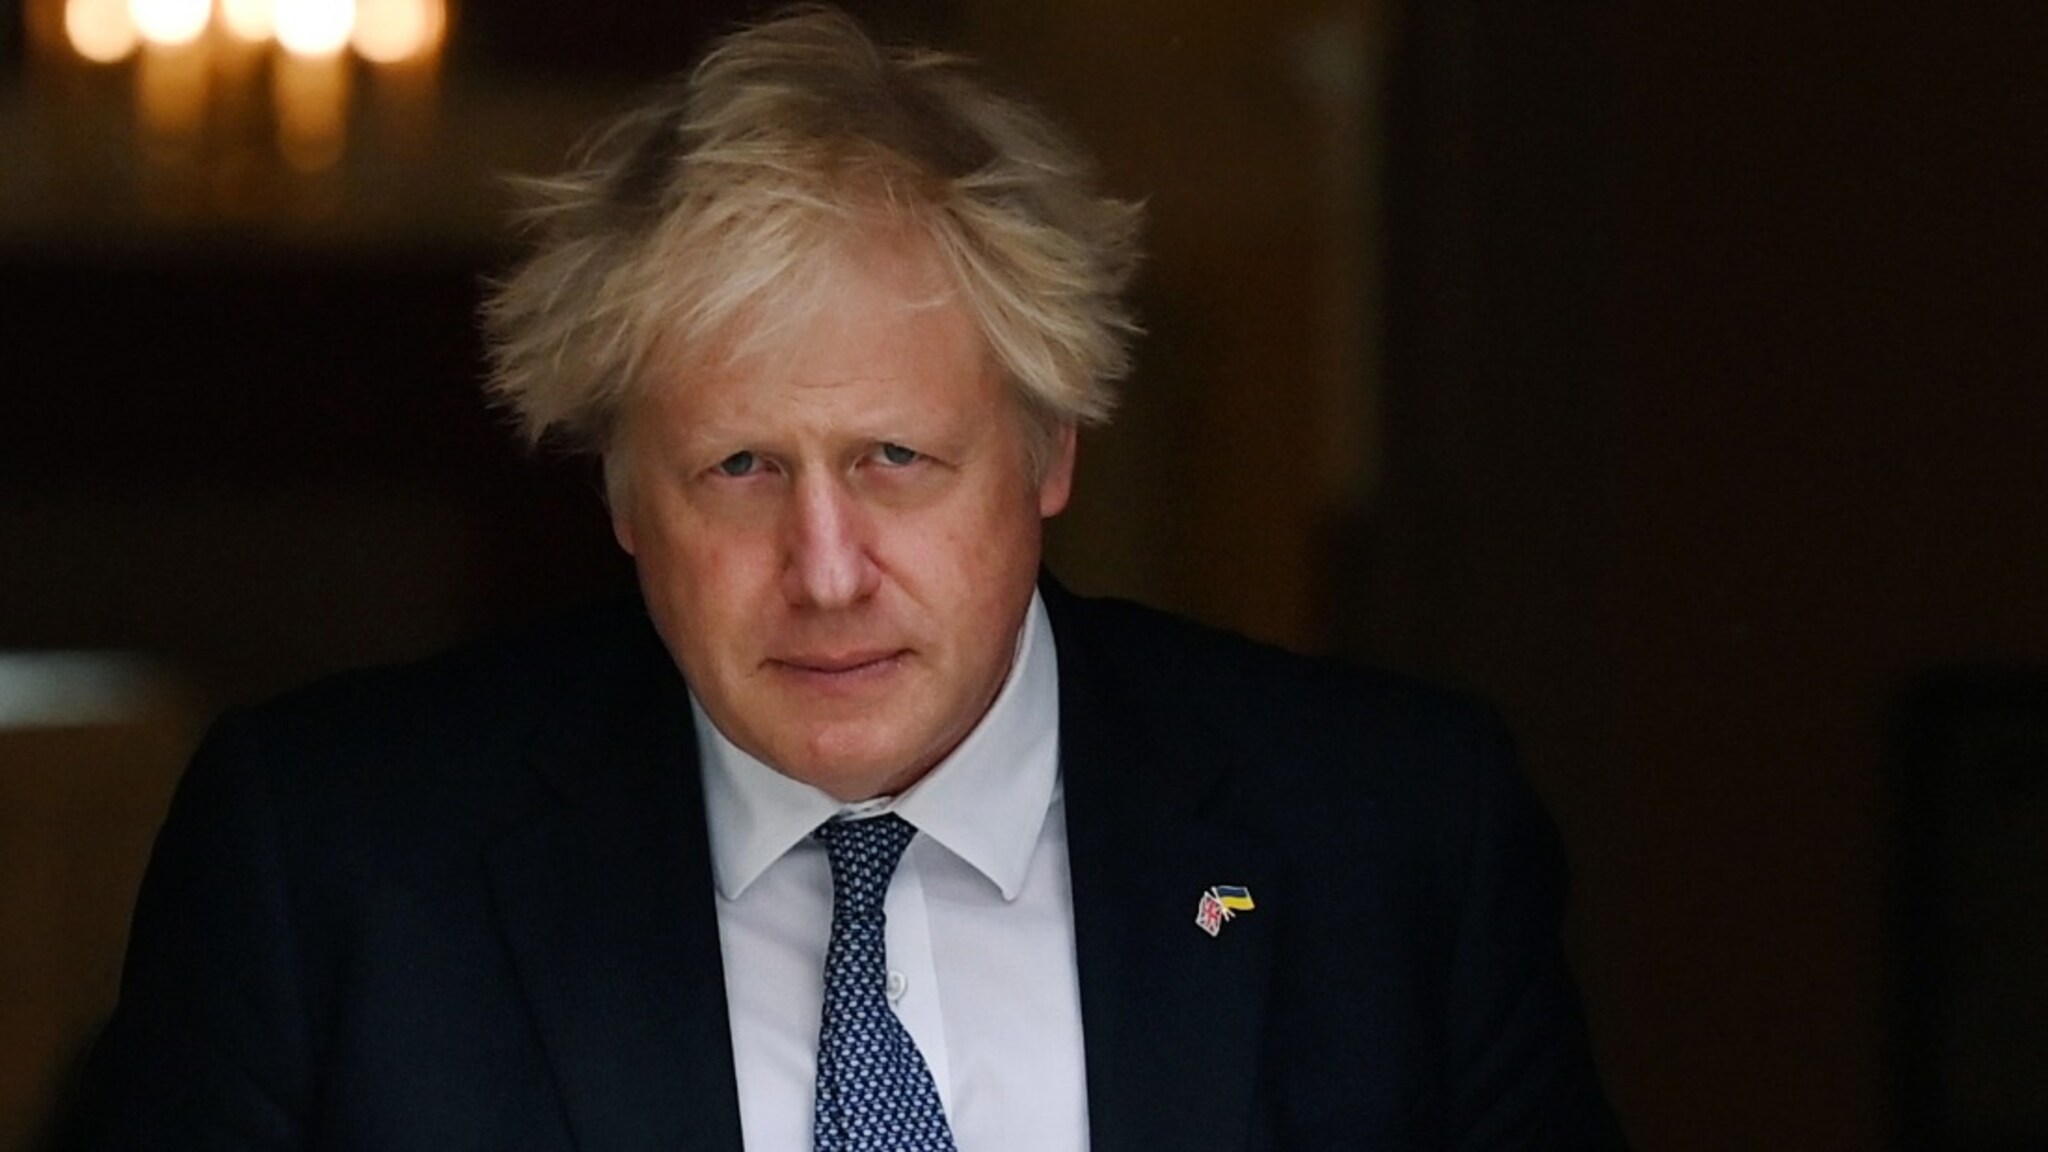 Ministers urge Prime Minister Boris Johnson to resign: ‘The situation is untenable’